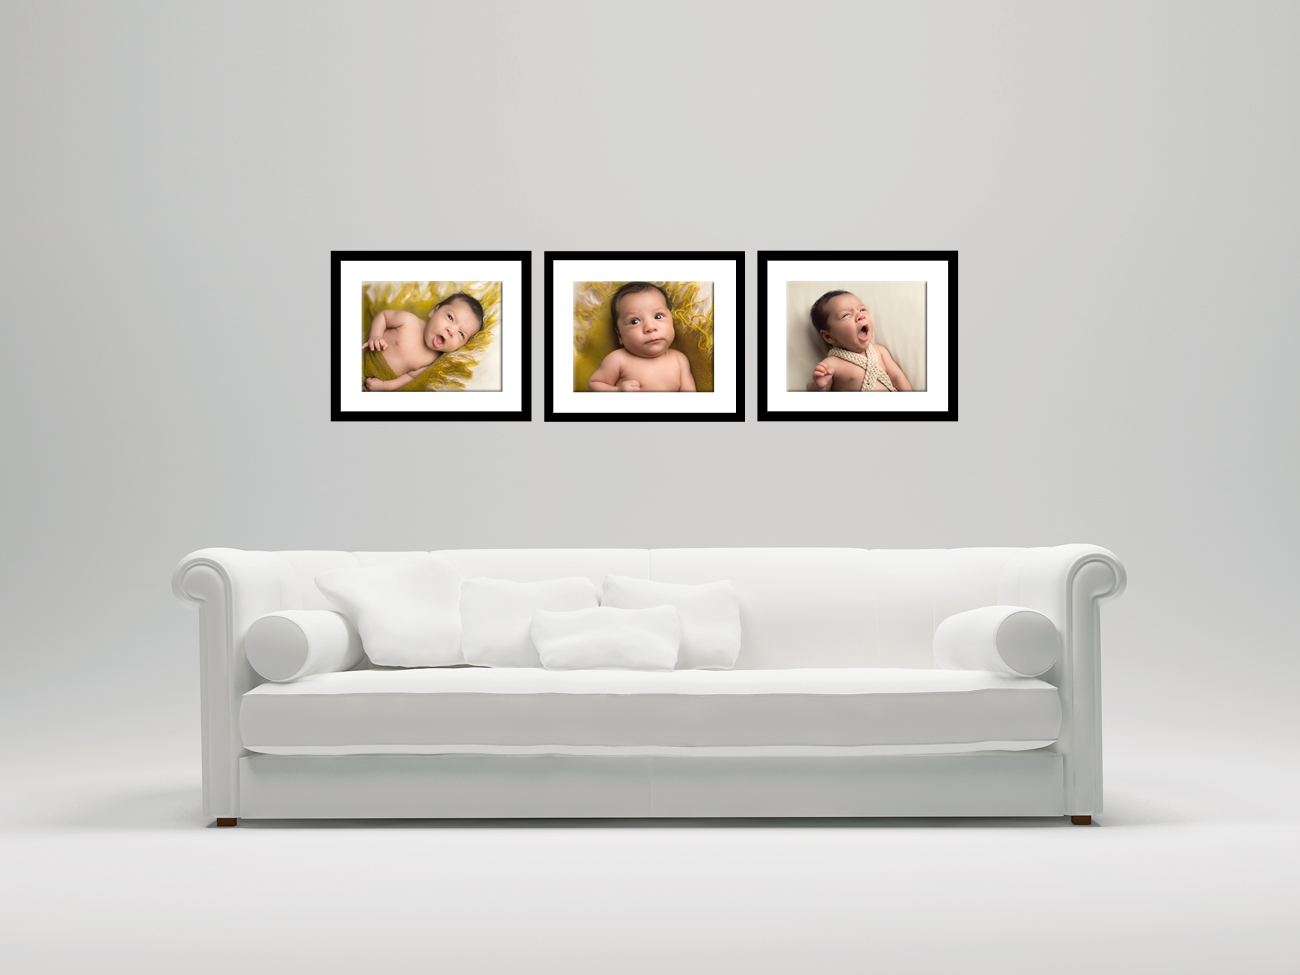 Wall photo display of framed group of images in 11x14 size.